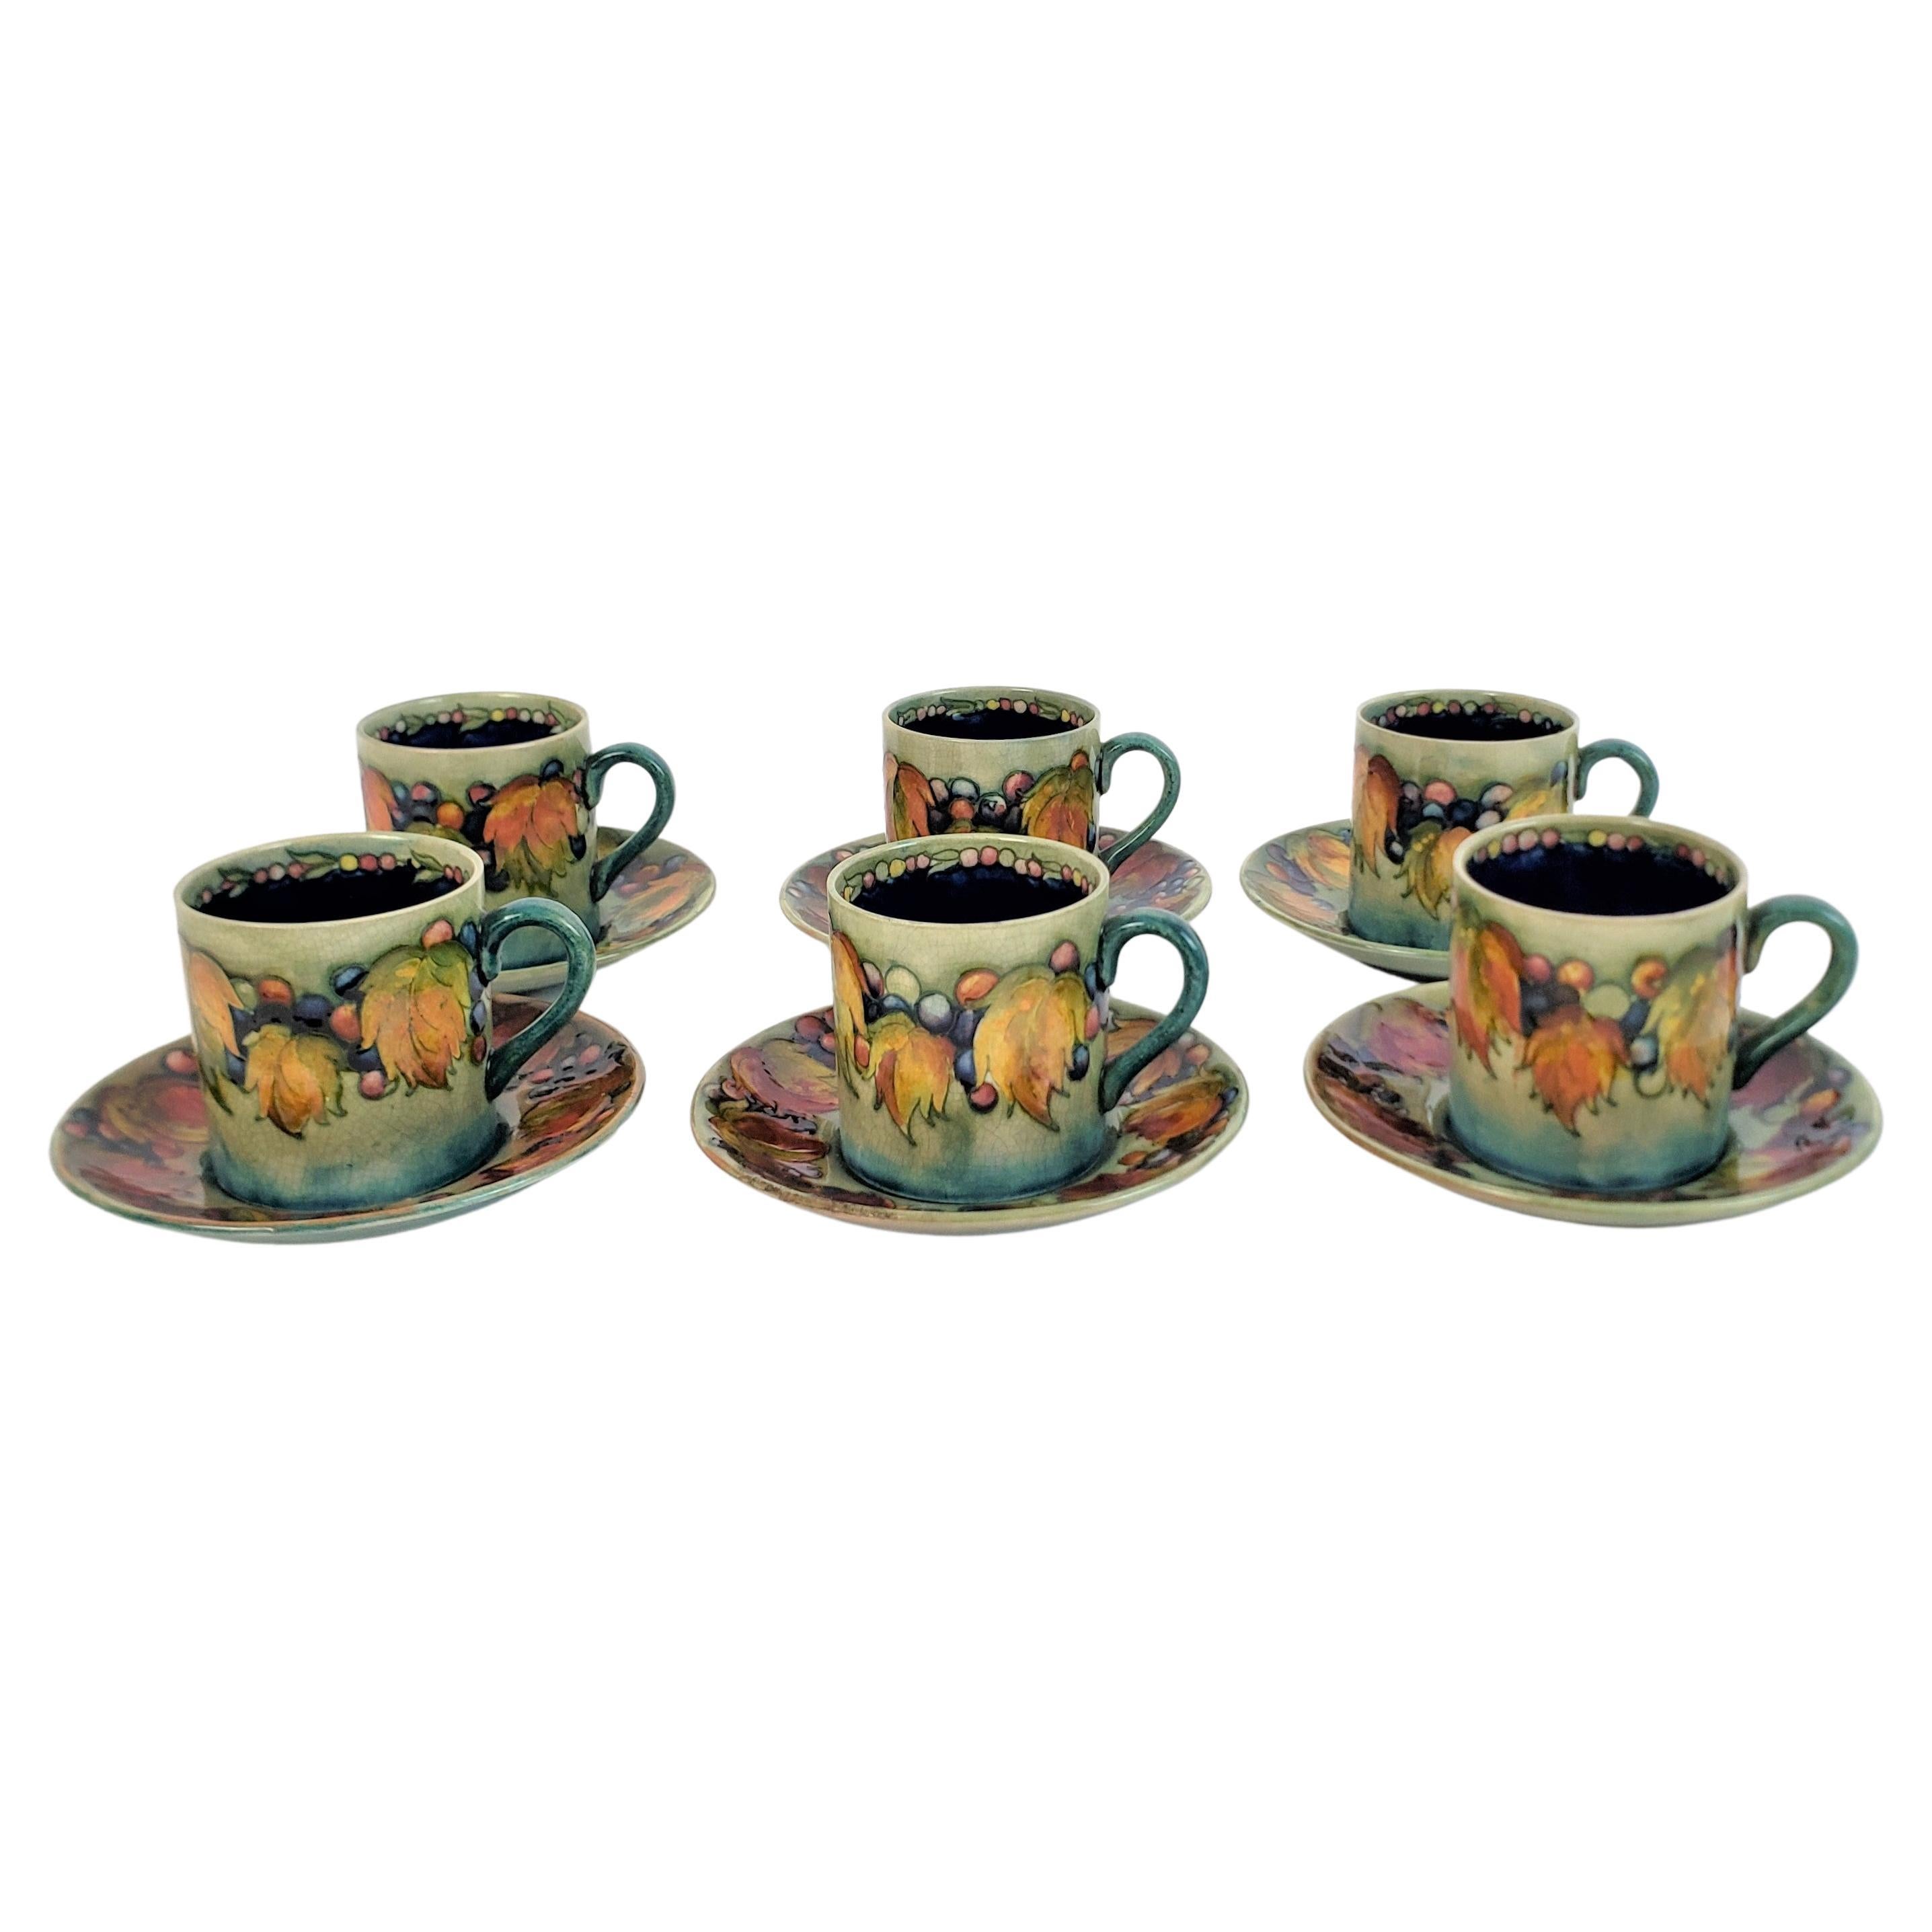 6 Moorcroft Art Pottery Demitasse Cup & Saucer Sets in the Leaf & Berry Pattern For Sale